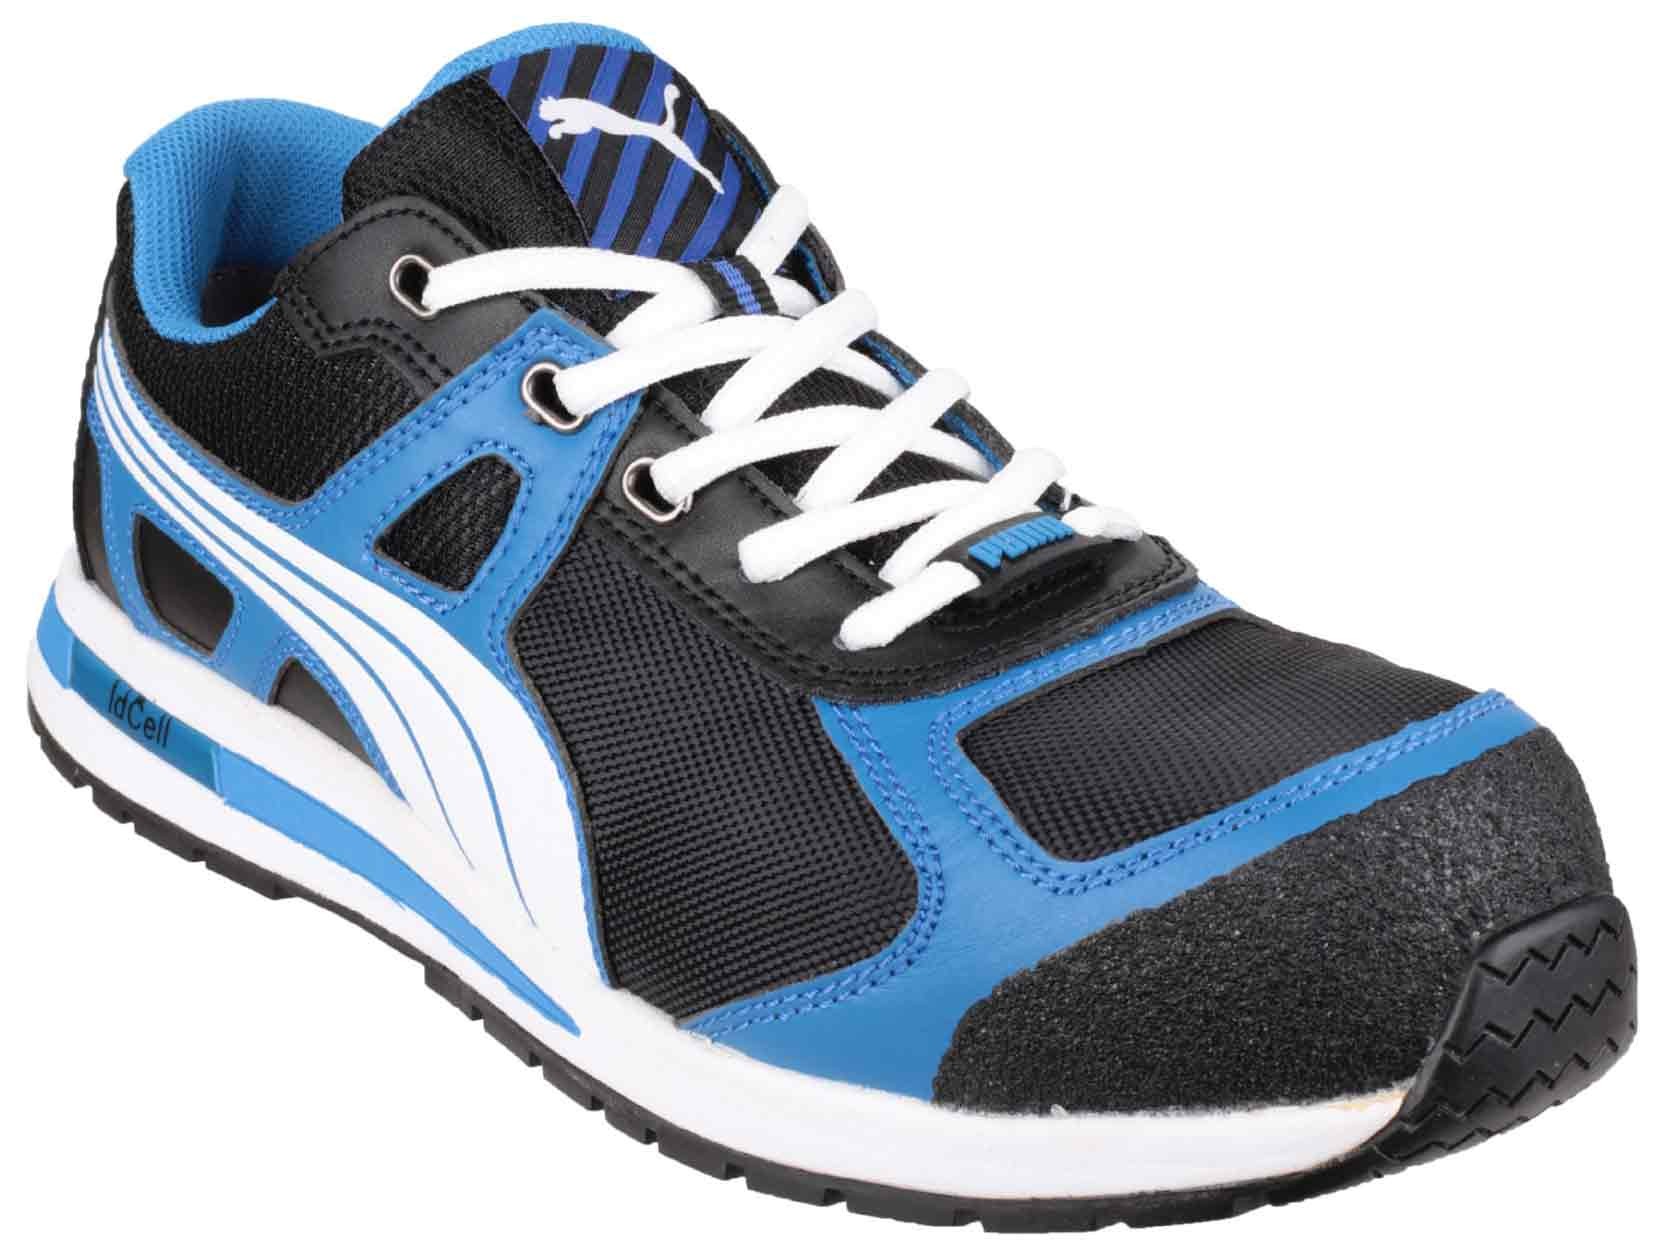 Puma Safety Aerial Low Safety Shoe - Safety Shoes and Trainers - Mens  Safety Boots & Shoes - Safety Footwear - Best Workwear